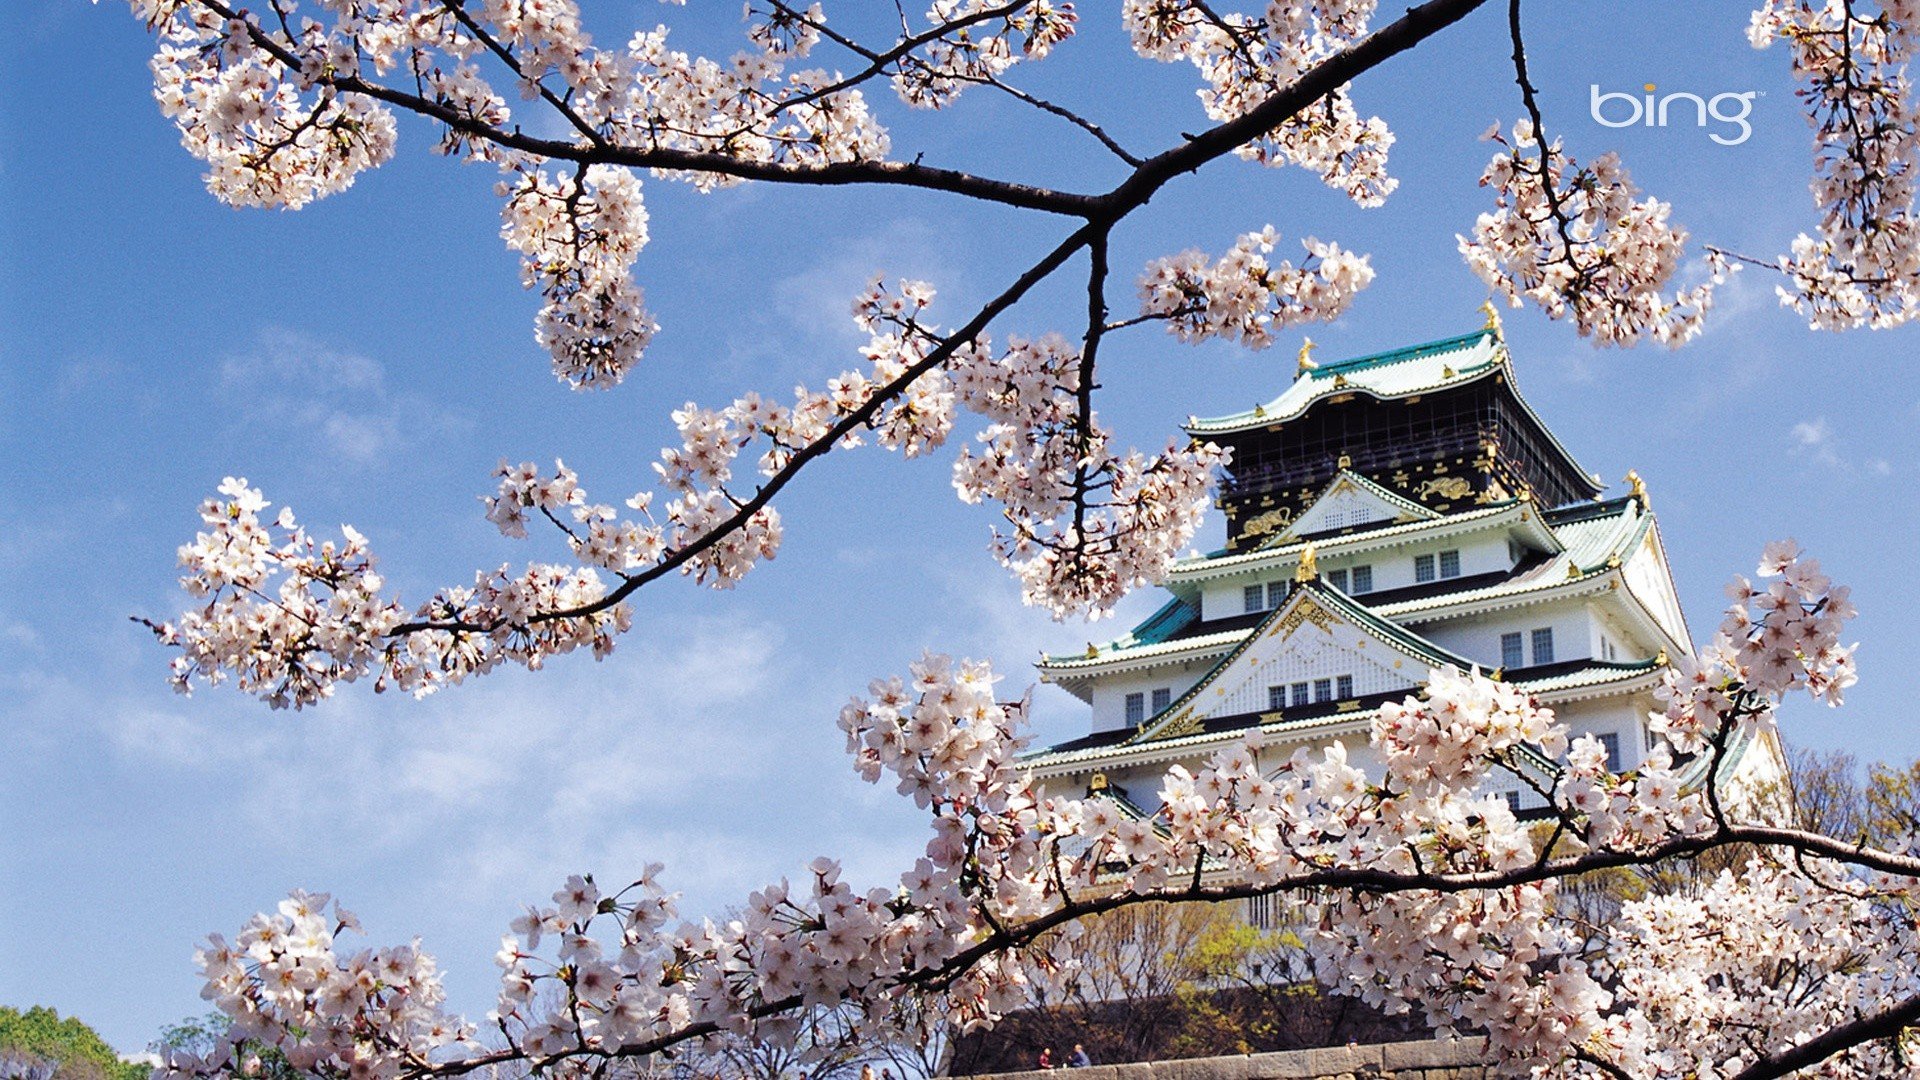 landscapes, Nature, Cherry, Blossoms, Oriental, Spring, Flowers, Temple Wallpaper